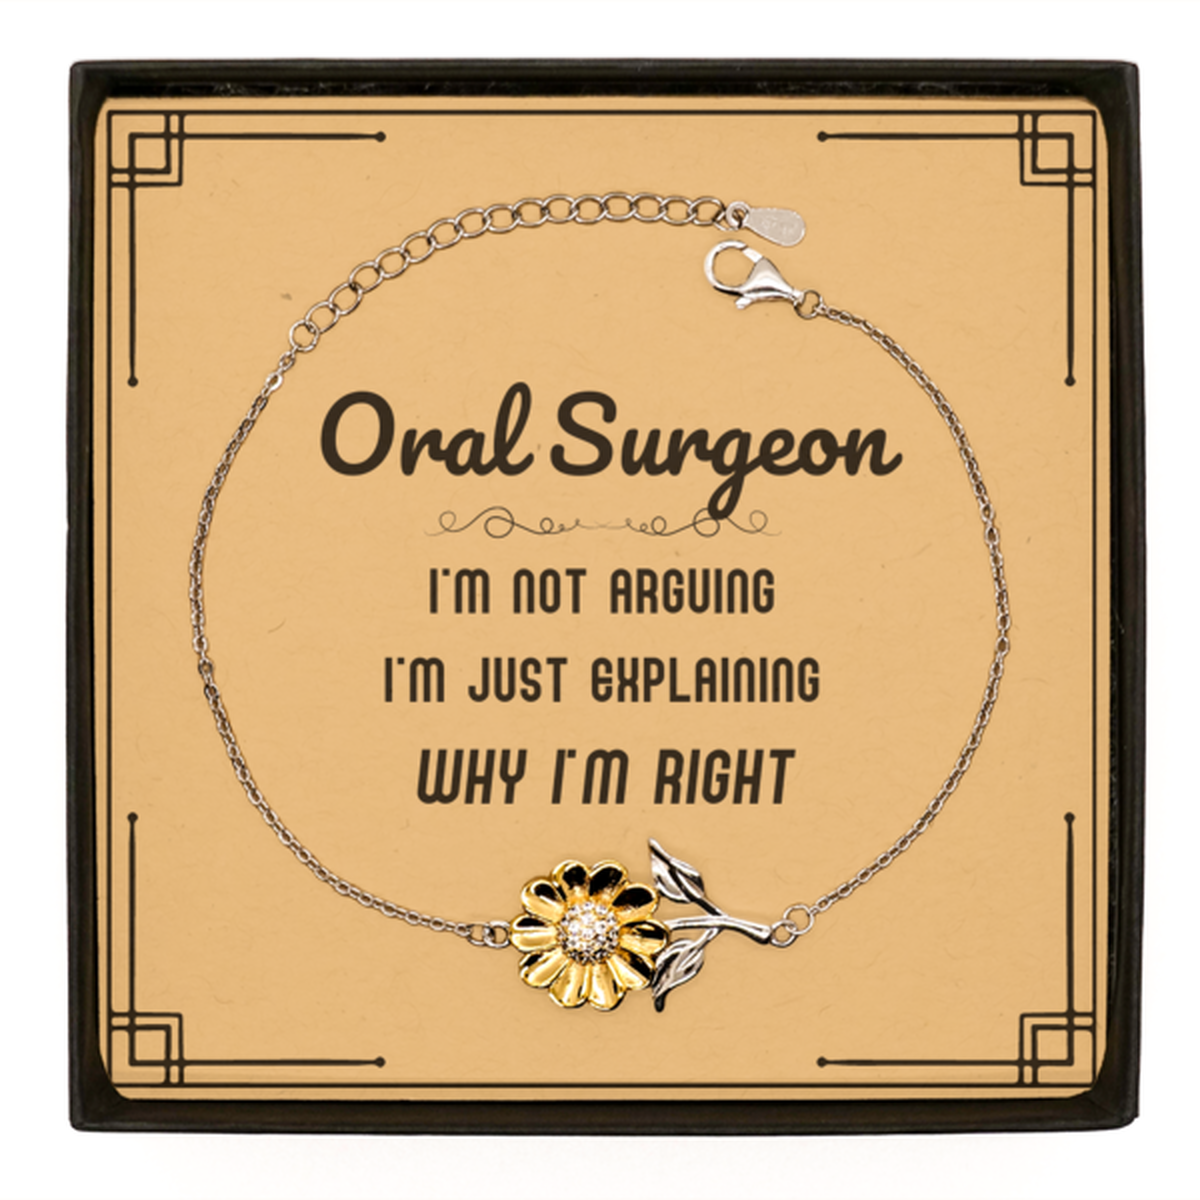 Oral Surgeon I'm not Arguing. I'm Just Explaining Why I'm RIGHT Sunflower Bracelet, Funny Saying Quote Oral Surgeon Gifts For Oral Surgeon Message Card Graduation Birthday Christmas Gifts for Men Women Coworker